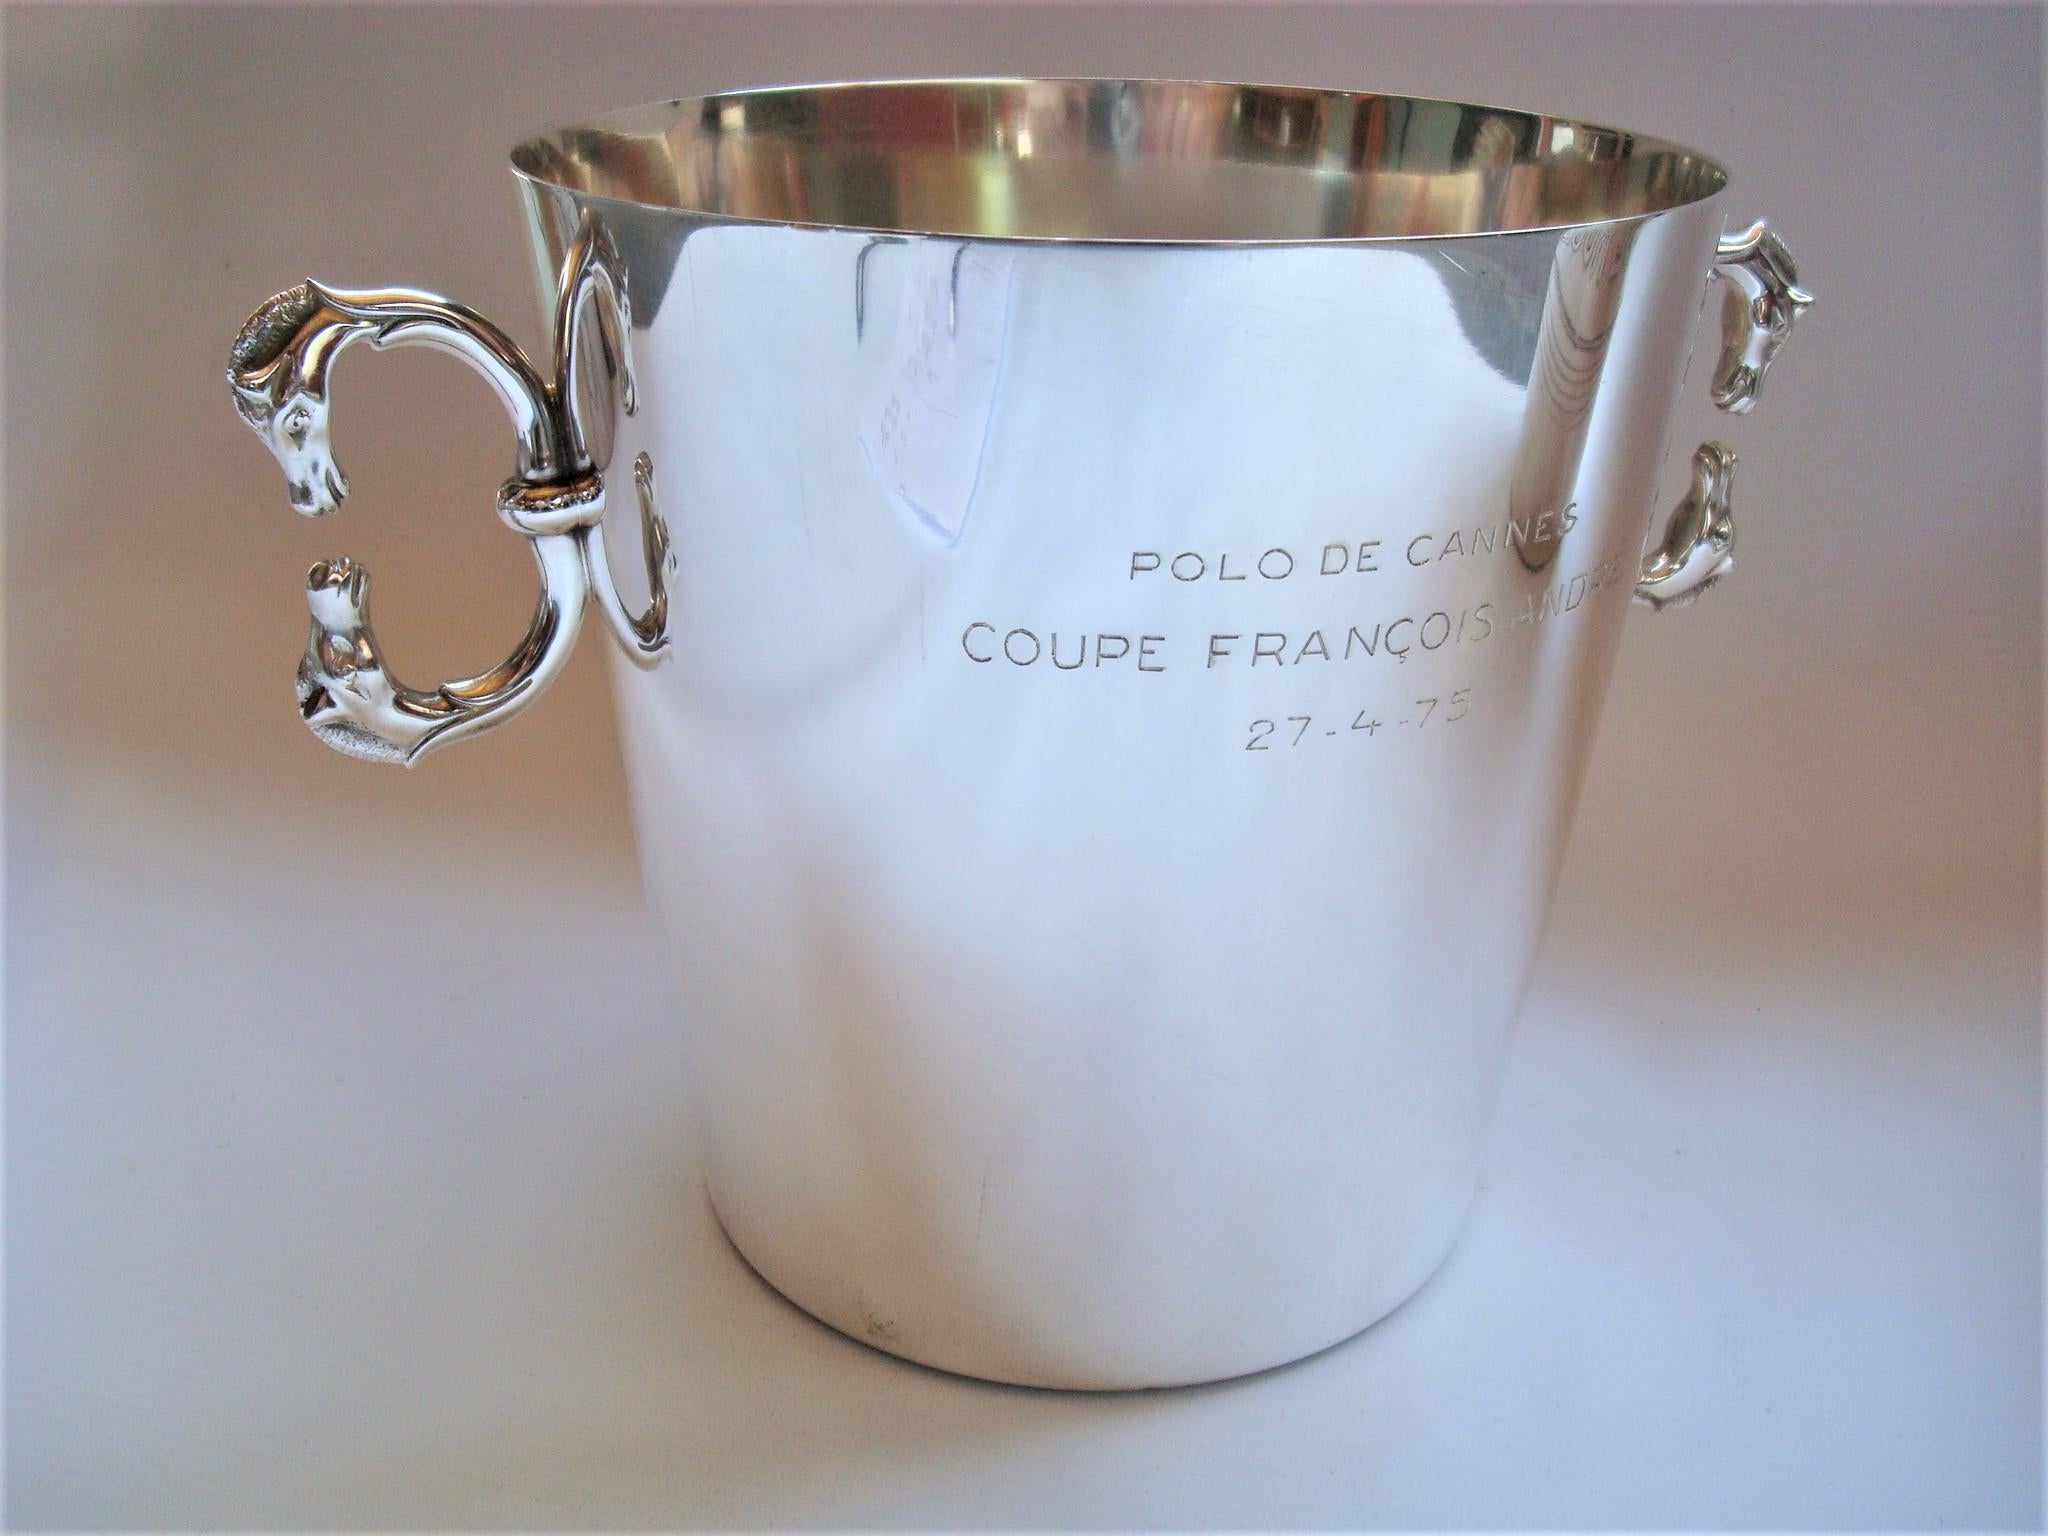 Hermes Champagne / Wine Bucket, Cooler, Polo Trophy Cannes 1975 3